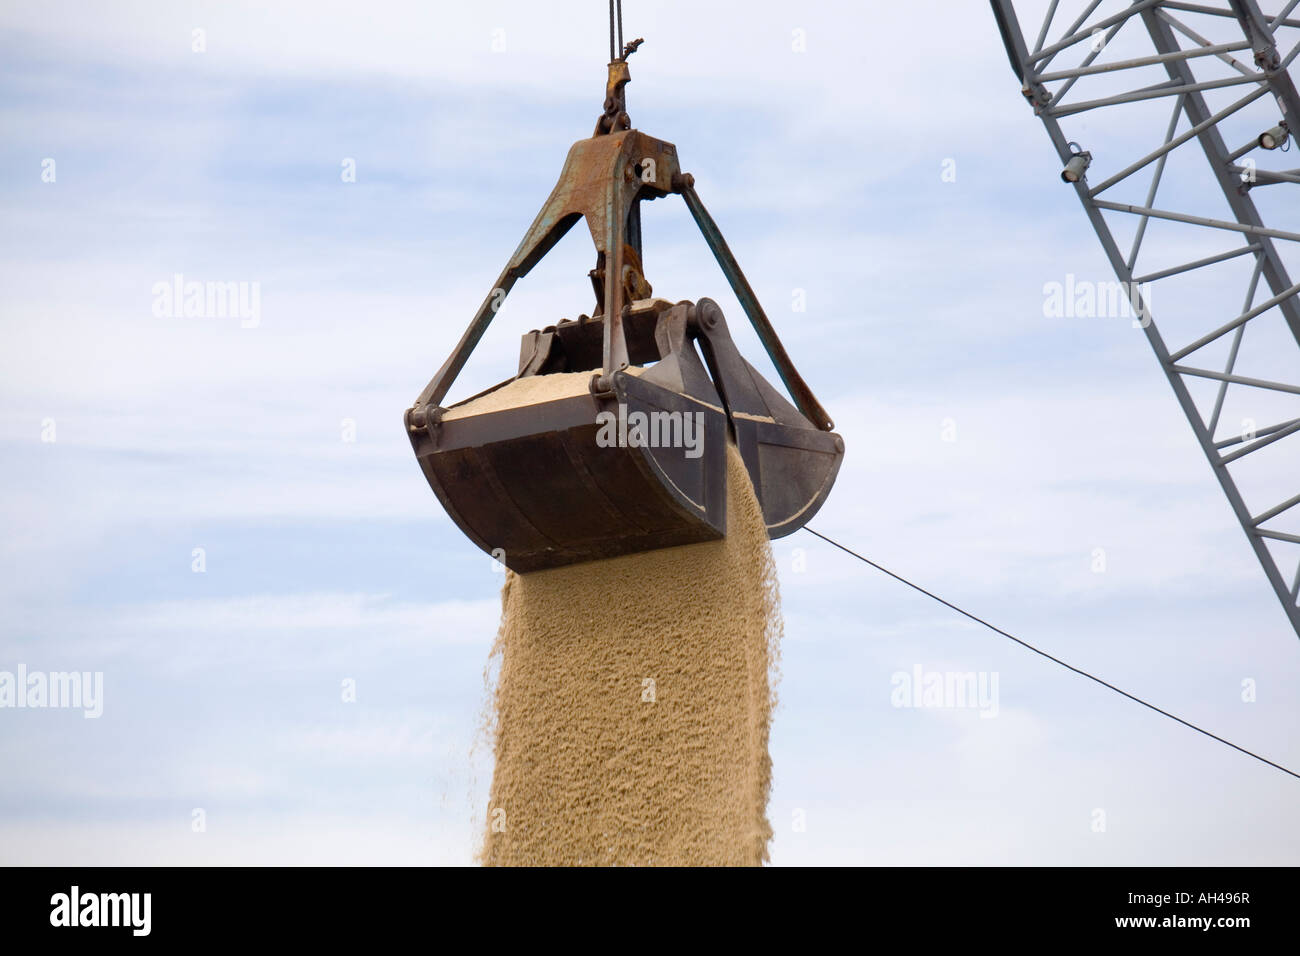 A clamshell bucketloader offloads sand from a waiting tanker ship. Stock Photo